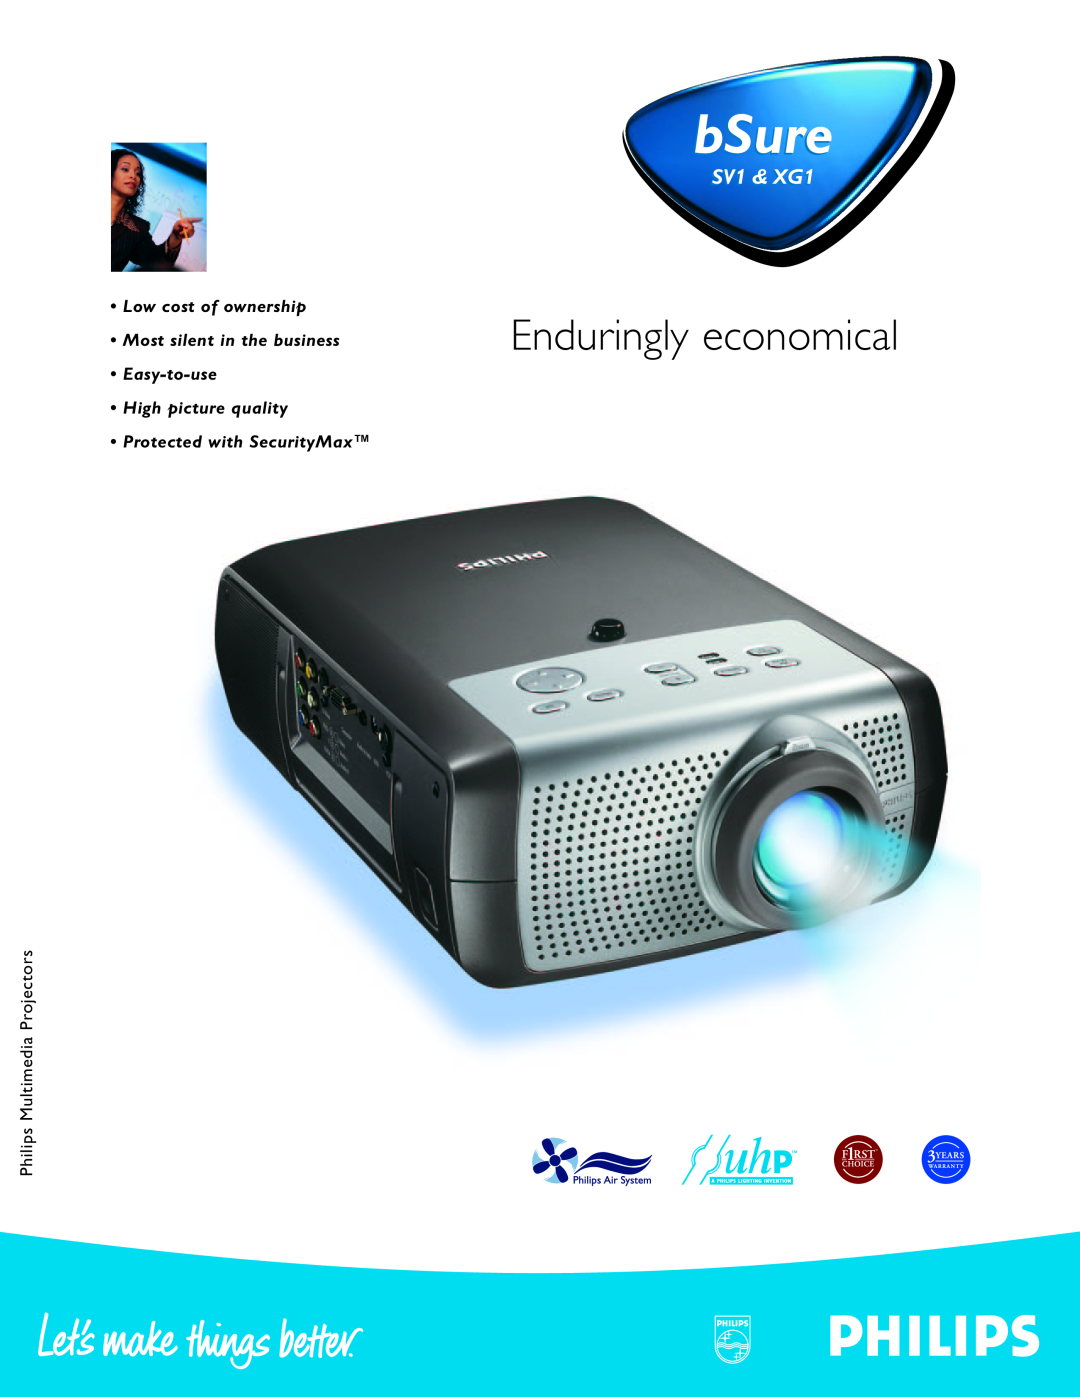 Philips XG1SV1 manual bSure, Enduringly economical, SV1 & XG1, Low cost of ownership, Philips Multimedia Projectors 